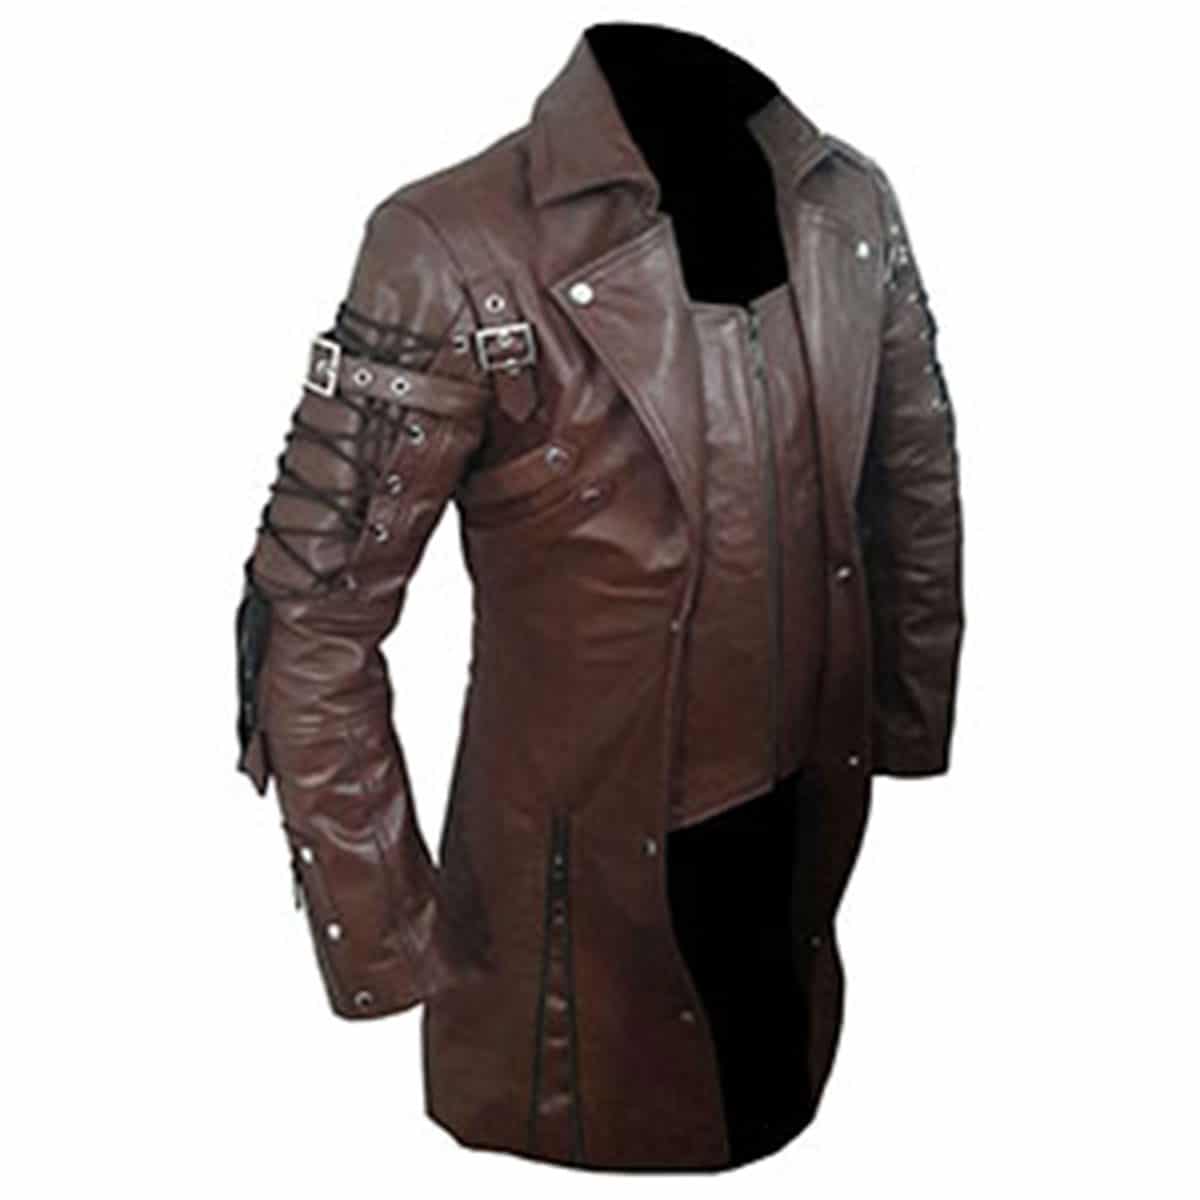 Mens Brown Leather Goth Matrix Trench Coat Steampunk Gothic - T18-BRW